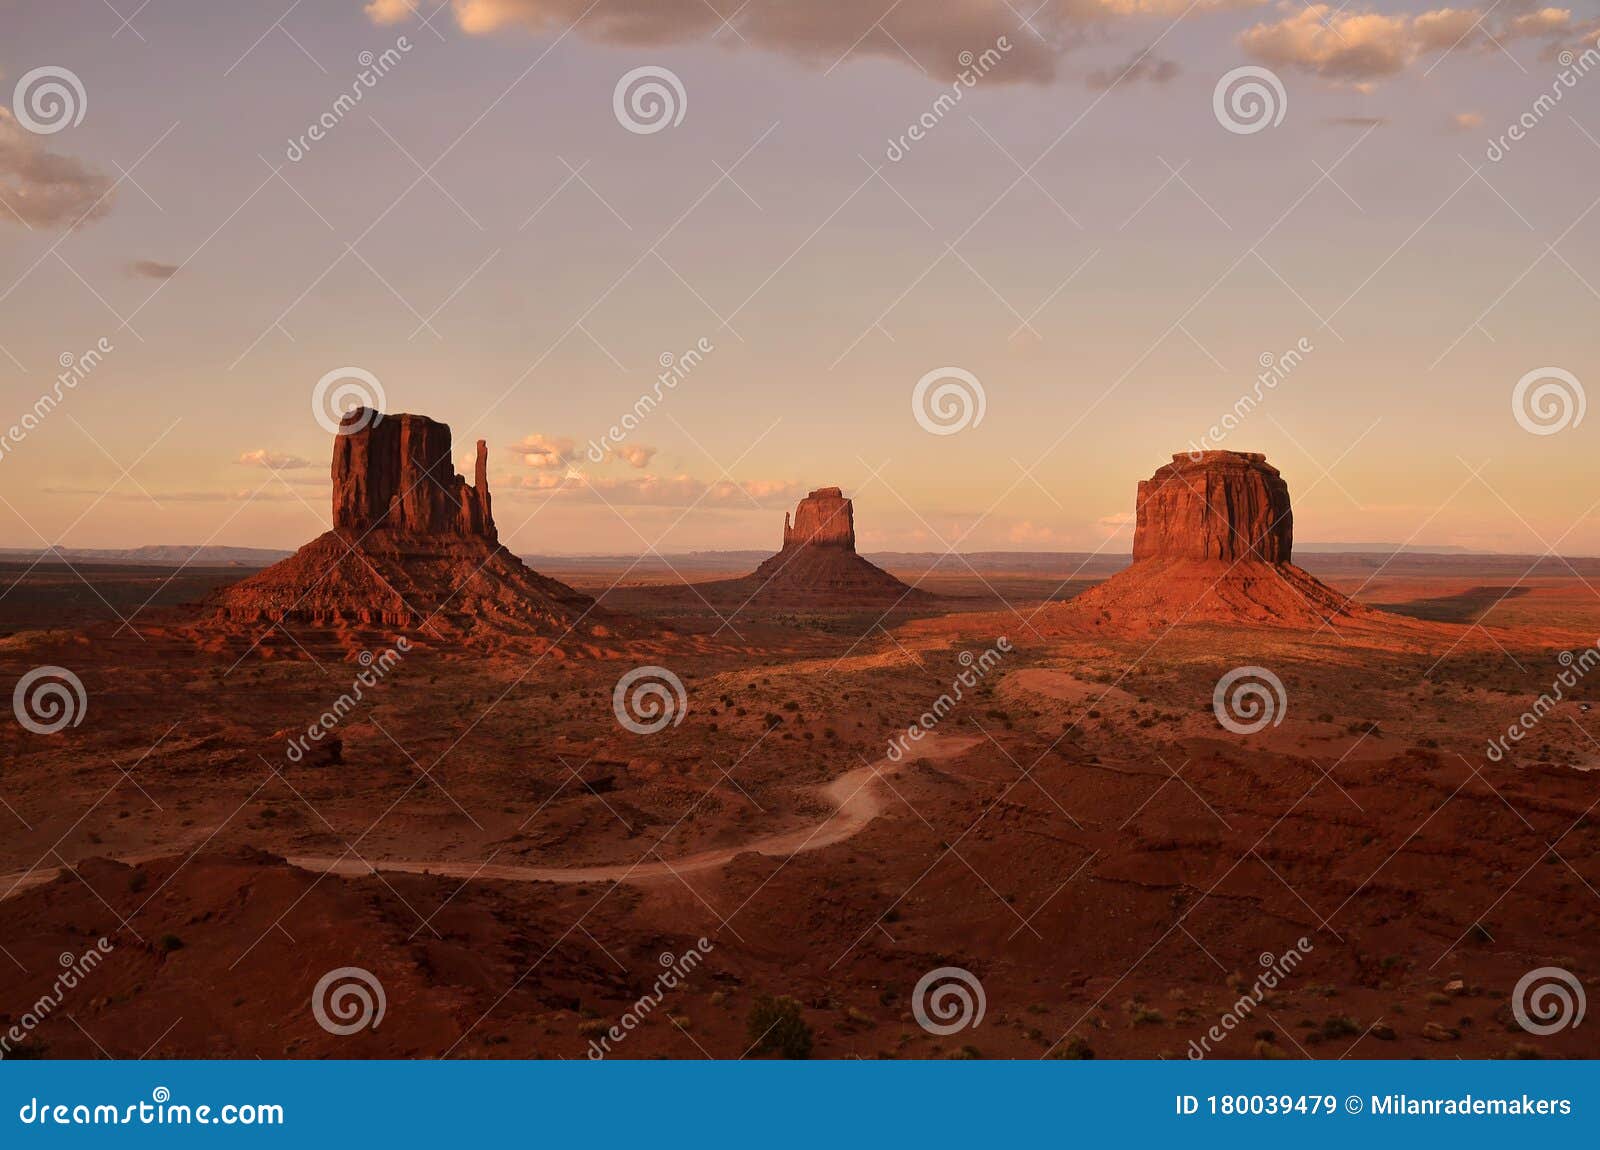 The Three Famous Rocks Of Monument Valley Standing Tall In The Vast Landscape During Sunset On A Summer Day Stock Image Image Of Wild Stone